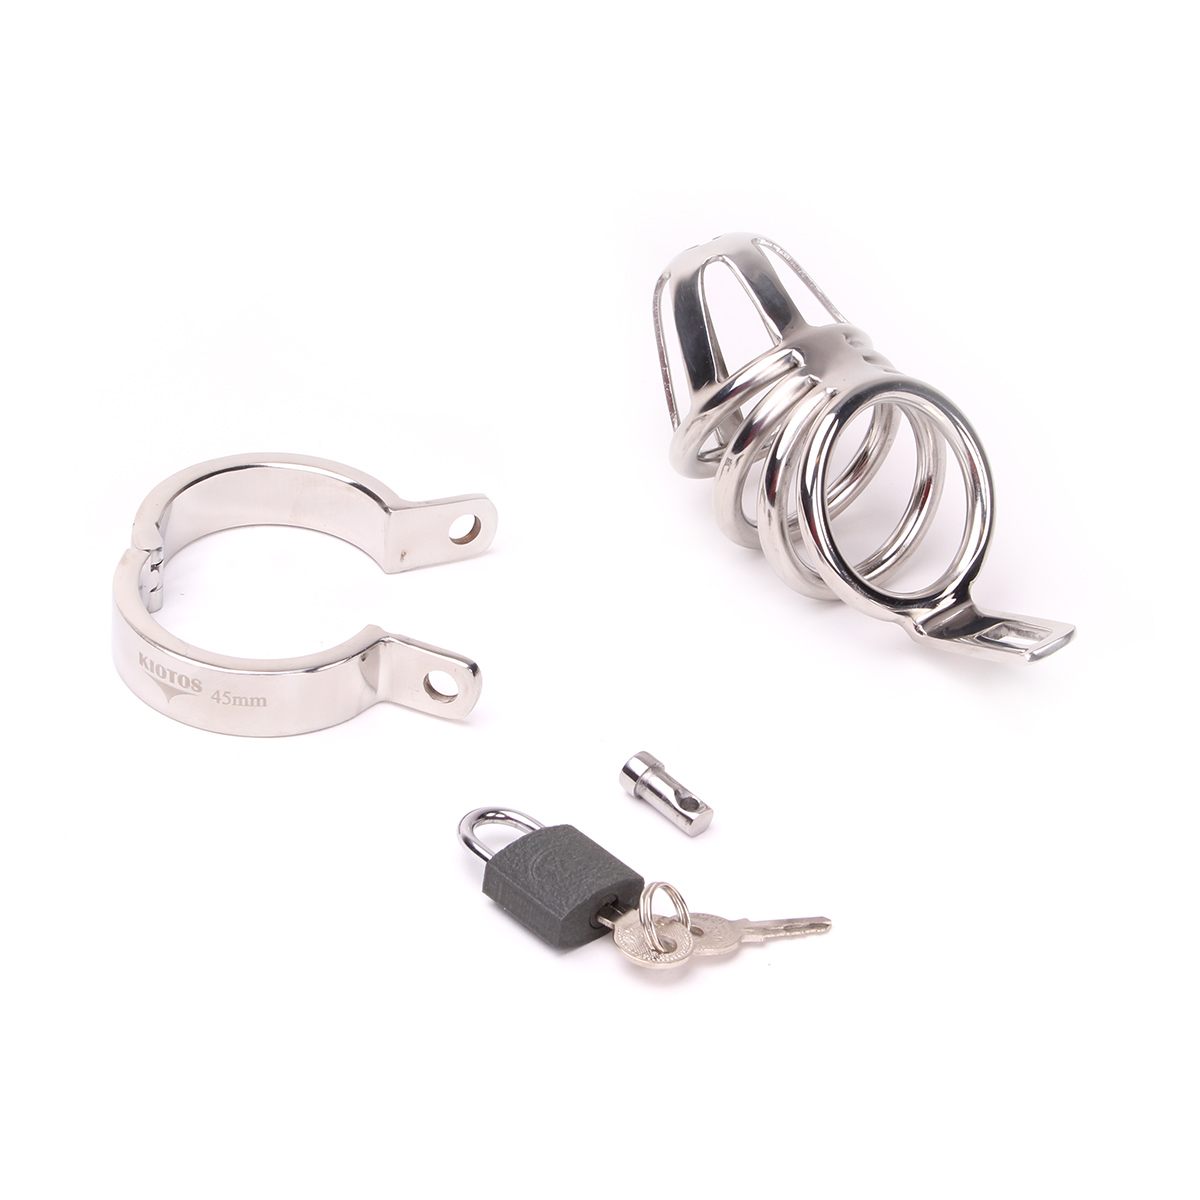 Chastity-Cage-Large-Steel-OPR-277031-5